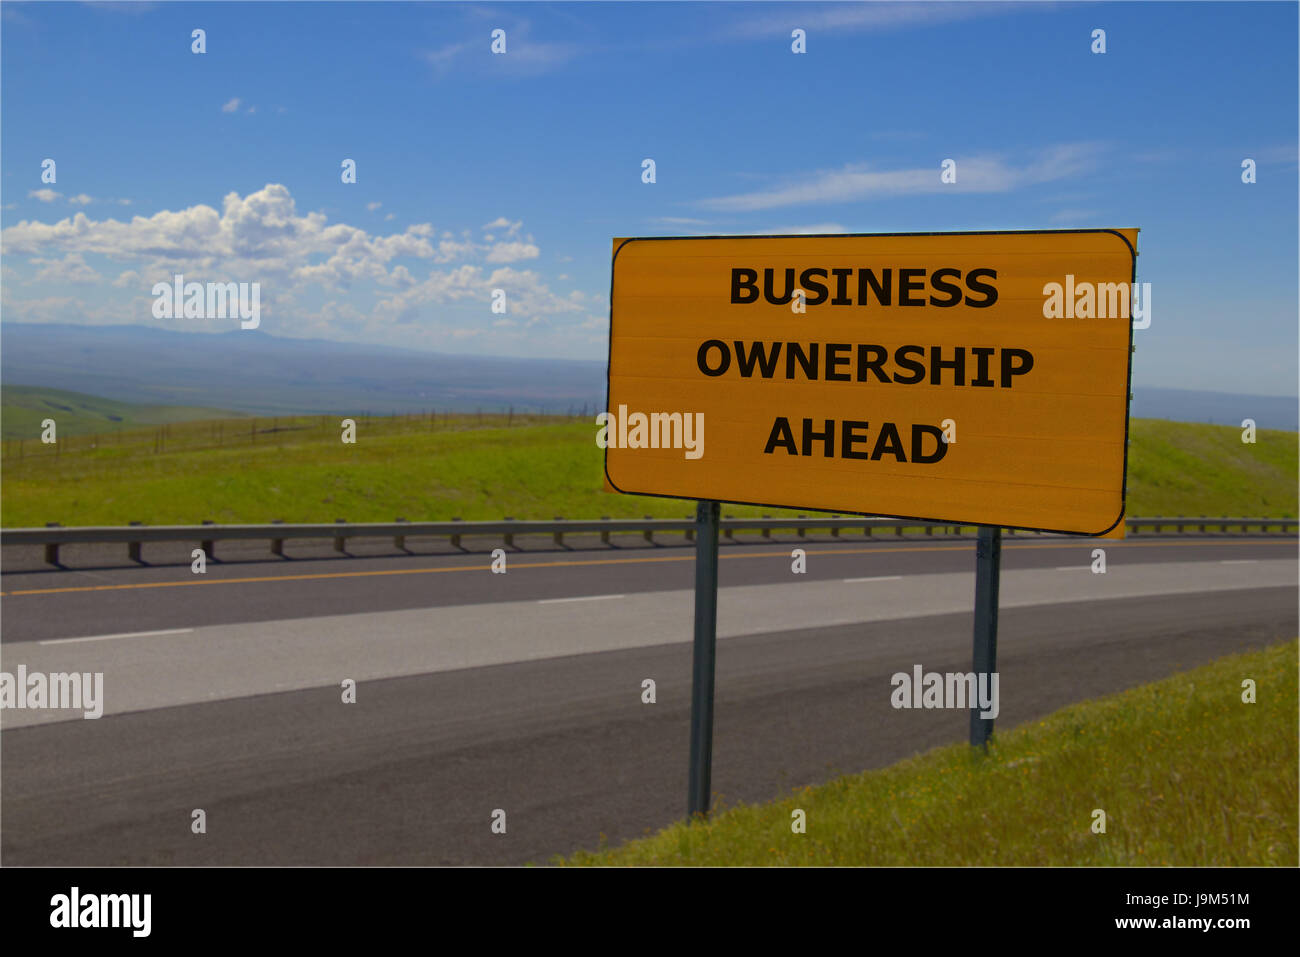 'Business Ownership Ahead' Stock Photo